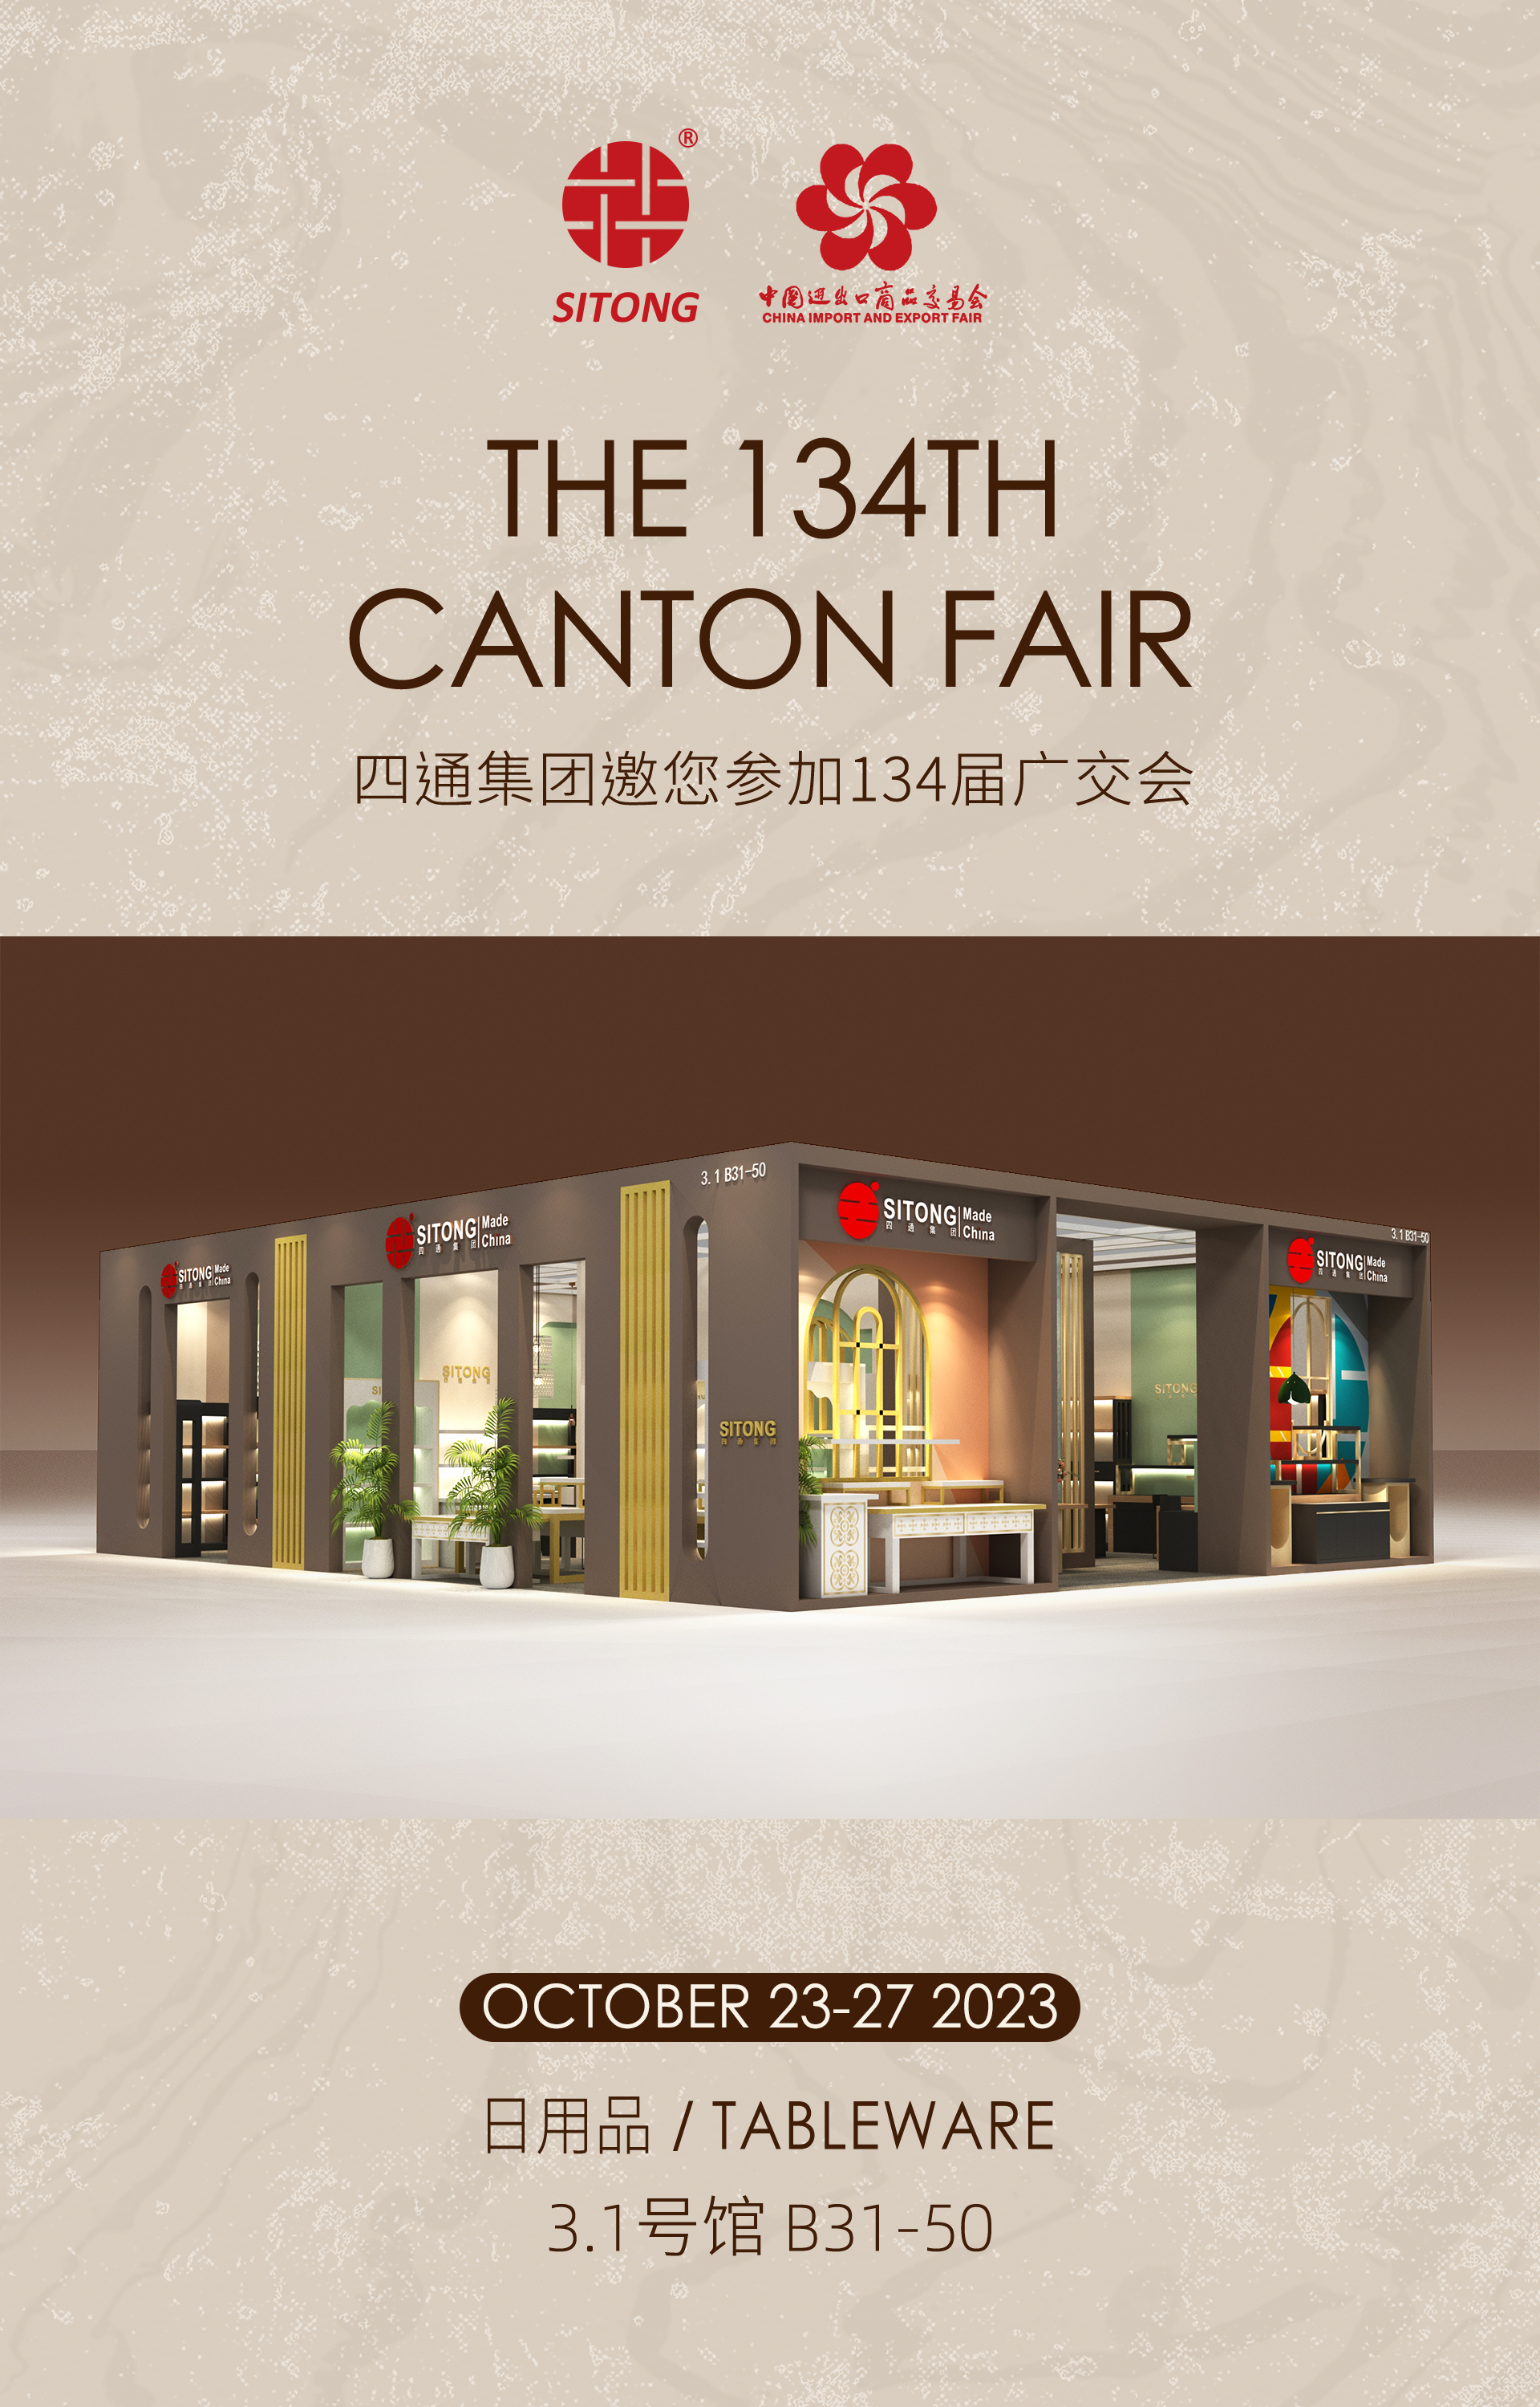 Welcome to visit us at 134th Canton Fair